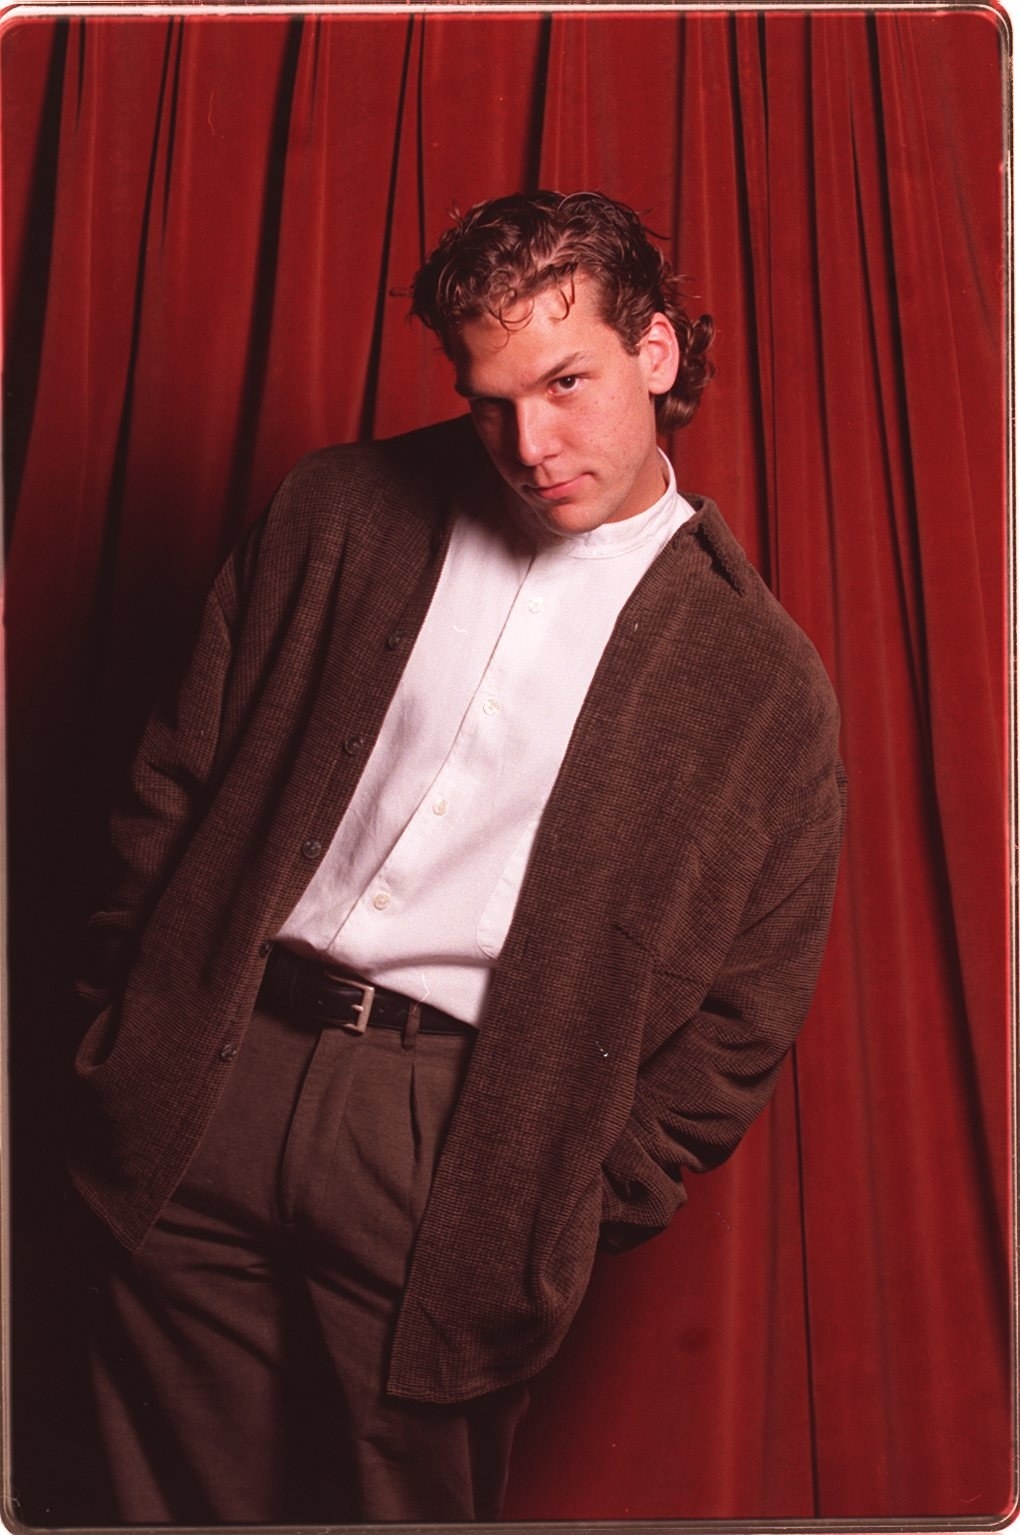 Dane Cook at the San Francisco stand-up comedy competition in 1995